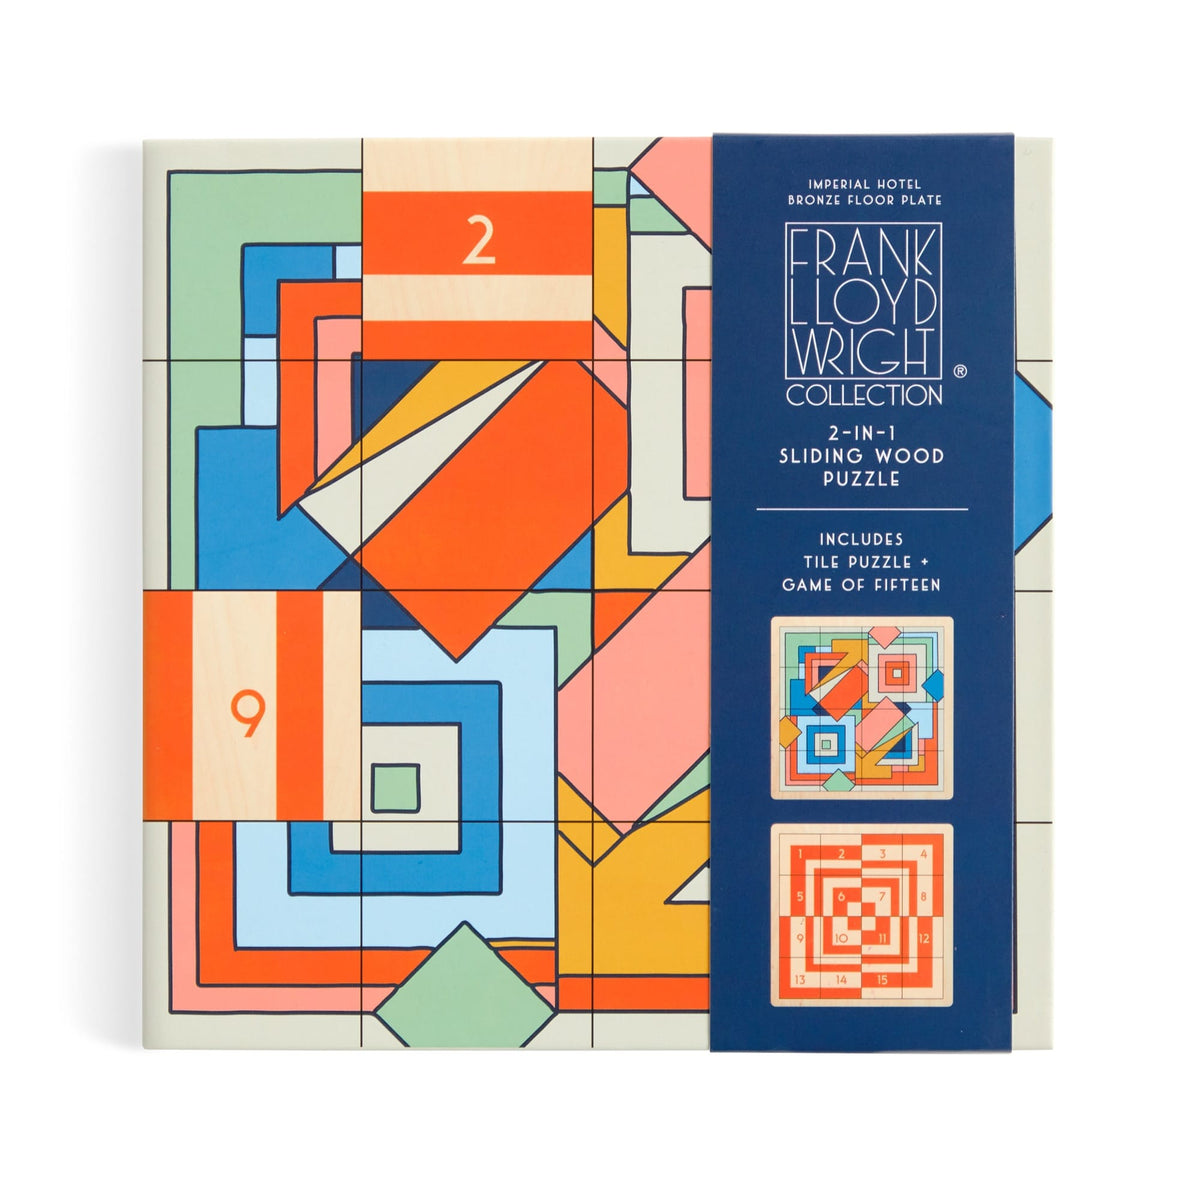 The Frank Lloyd Wright Imperial Hotel 2-in-1 Sliding Wood Puzzle includes both a puzzle and a game. 